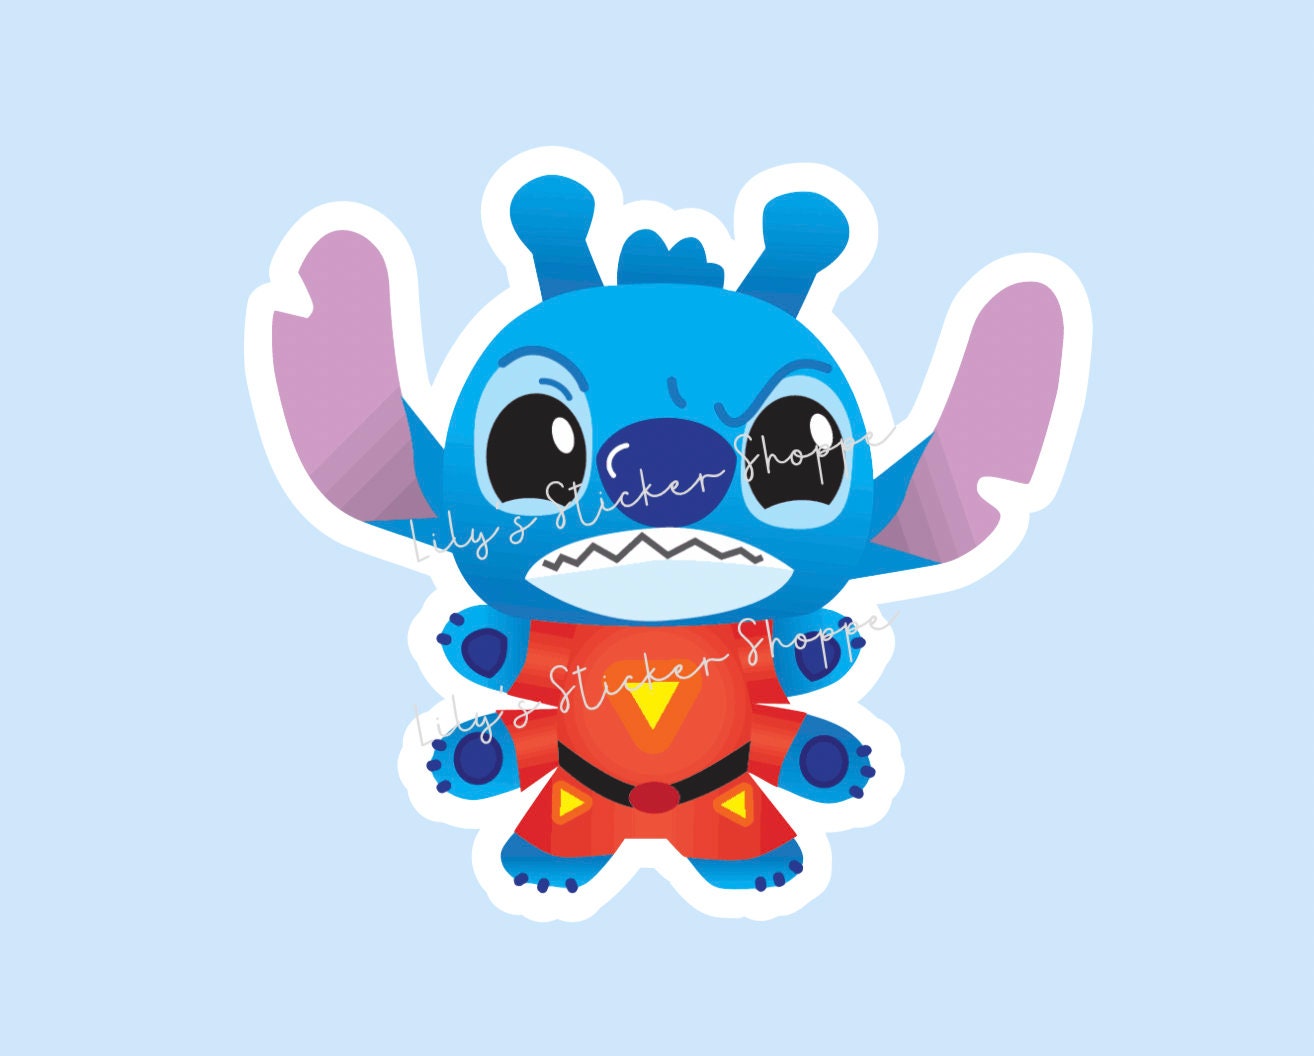 Disney Stitch Mini Figures 5 Pack - Lilo and Stitch Toy Bundle with 5 Stitch Cake Topper Figures Plus Stitch Stickers, Flower Stampers, and More